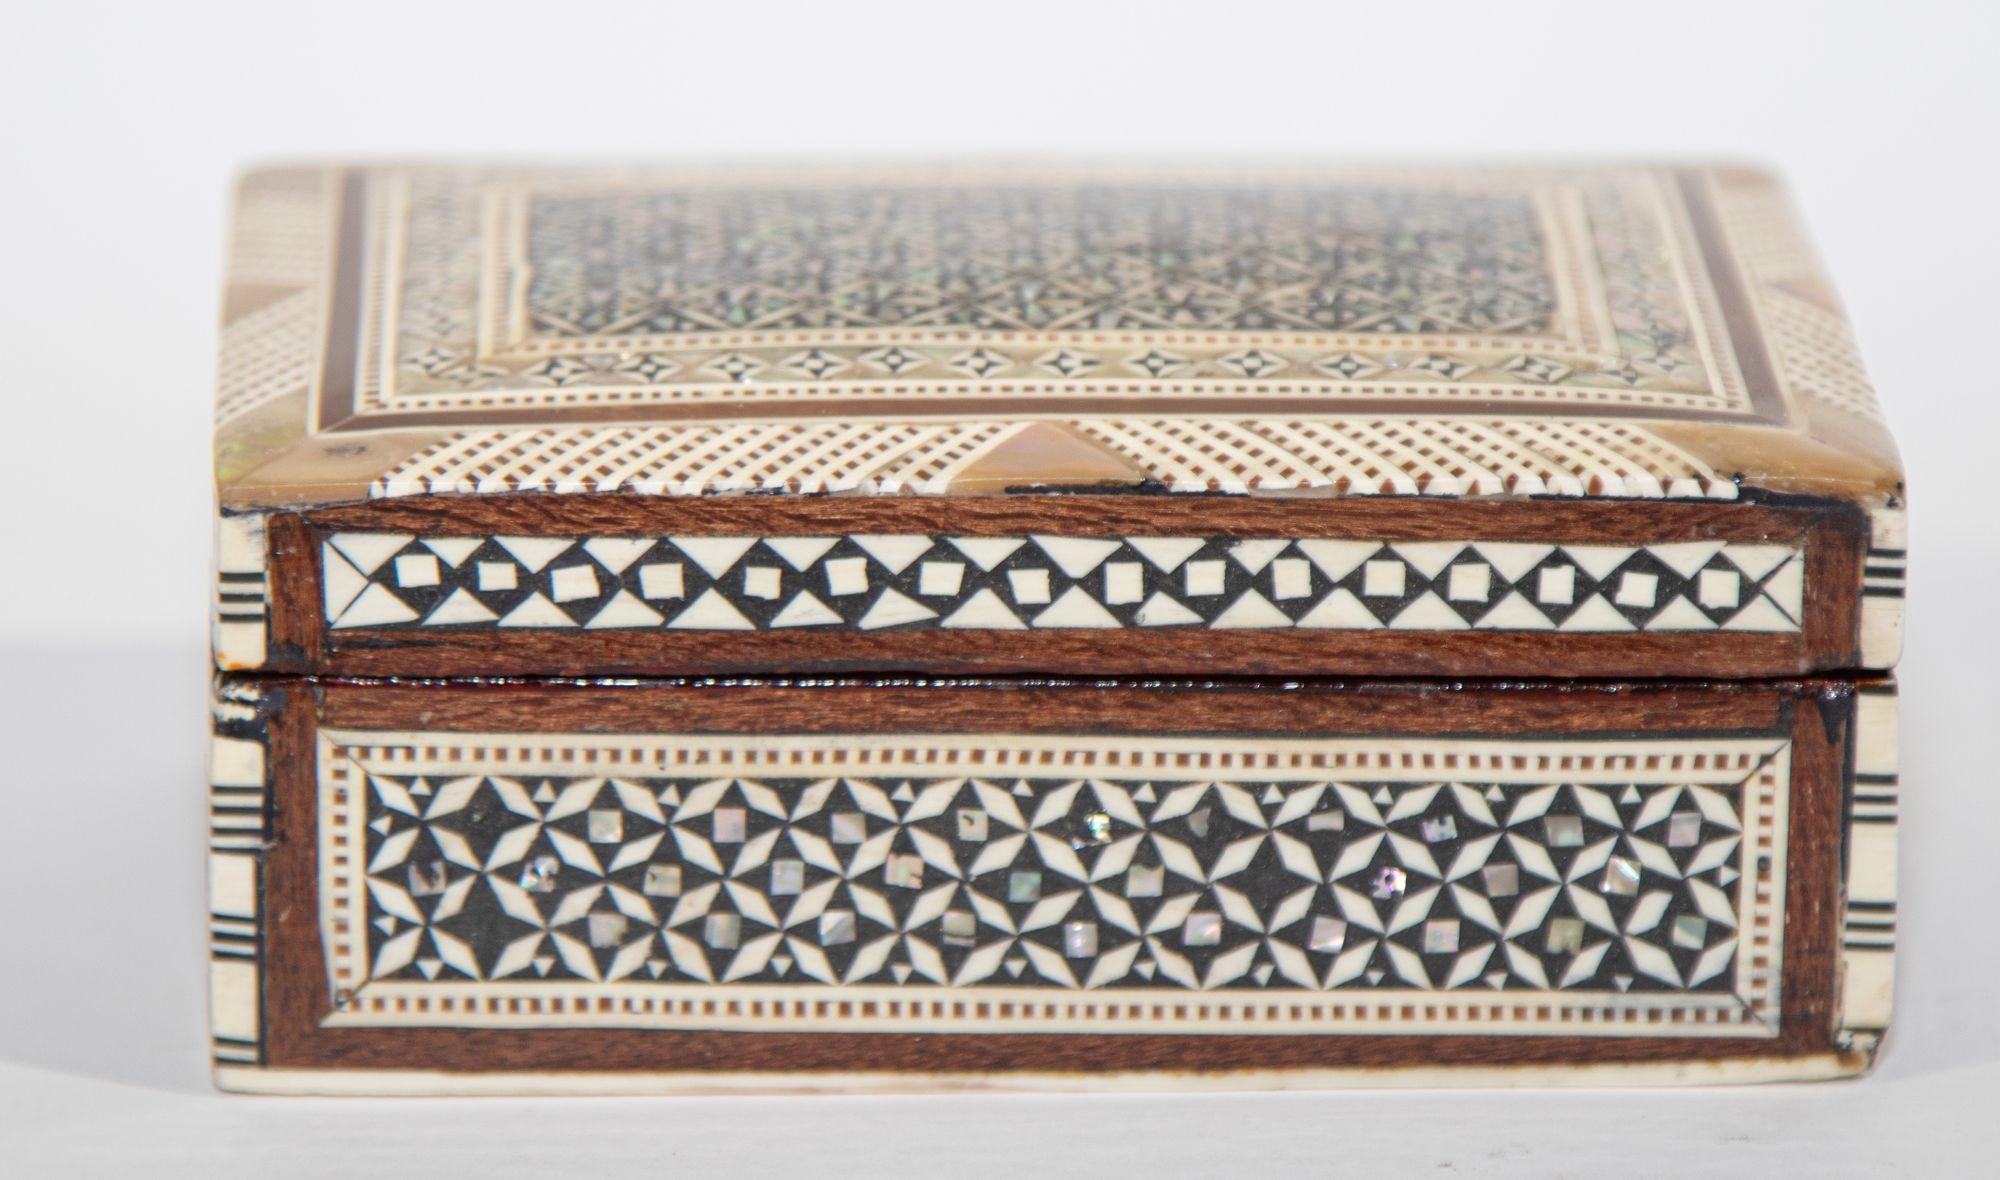 Middle Eastern Mosaic wood box with Inlays of bone and mother of Pearl, C. 1950s
Exquisite handcrafted Egyptian decorative wood box with mosaic marquetry design.
Vintage Moorish style box features geometric inlays in mother of pearl.
Outstanding